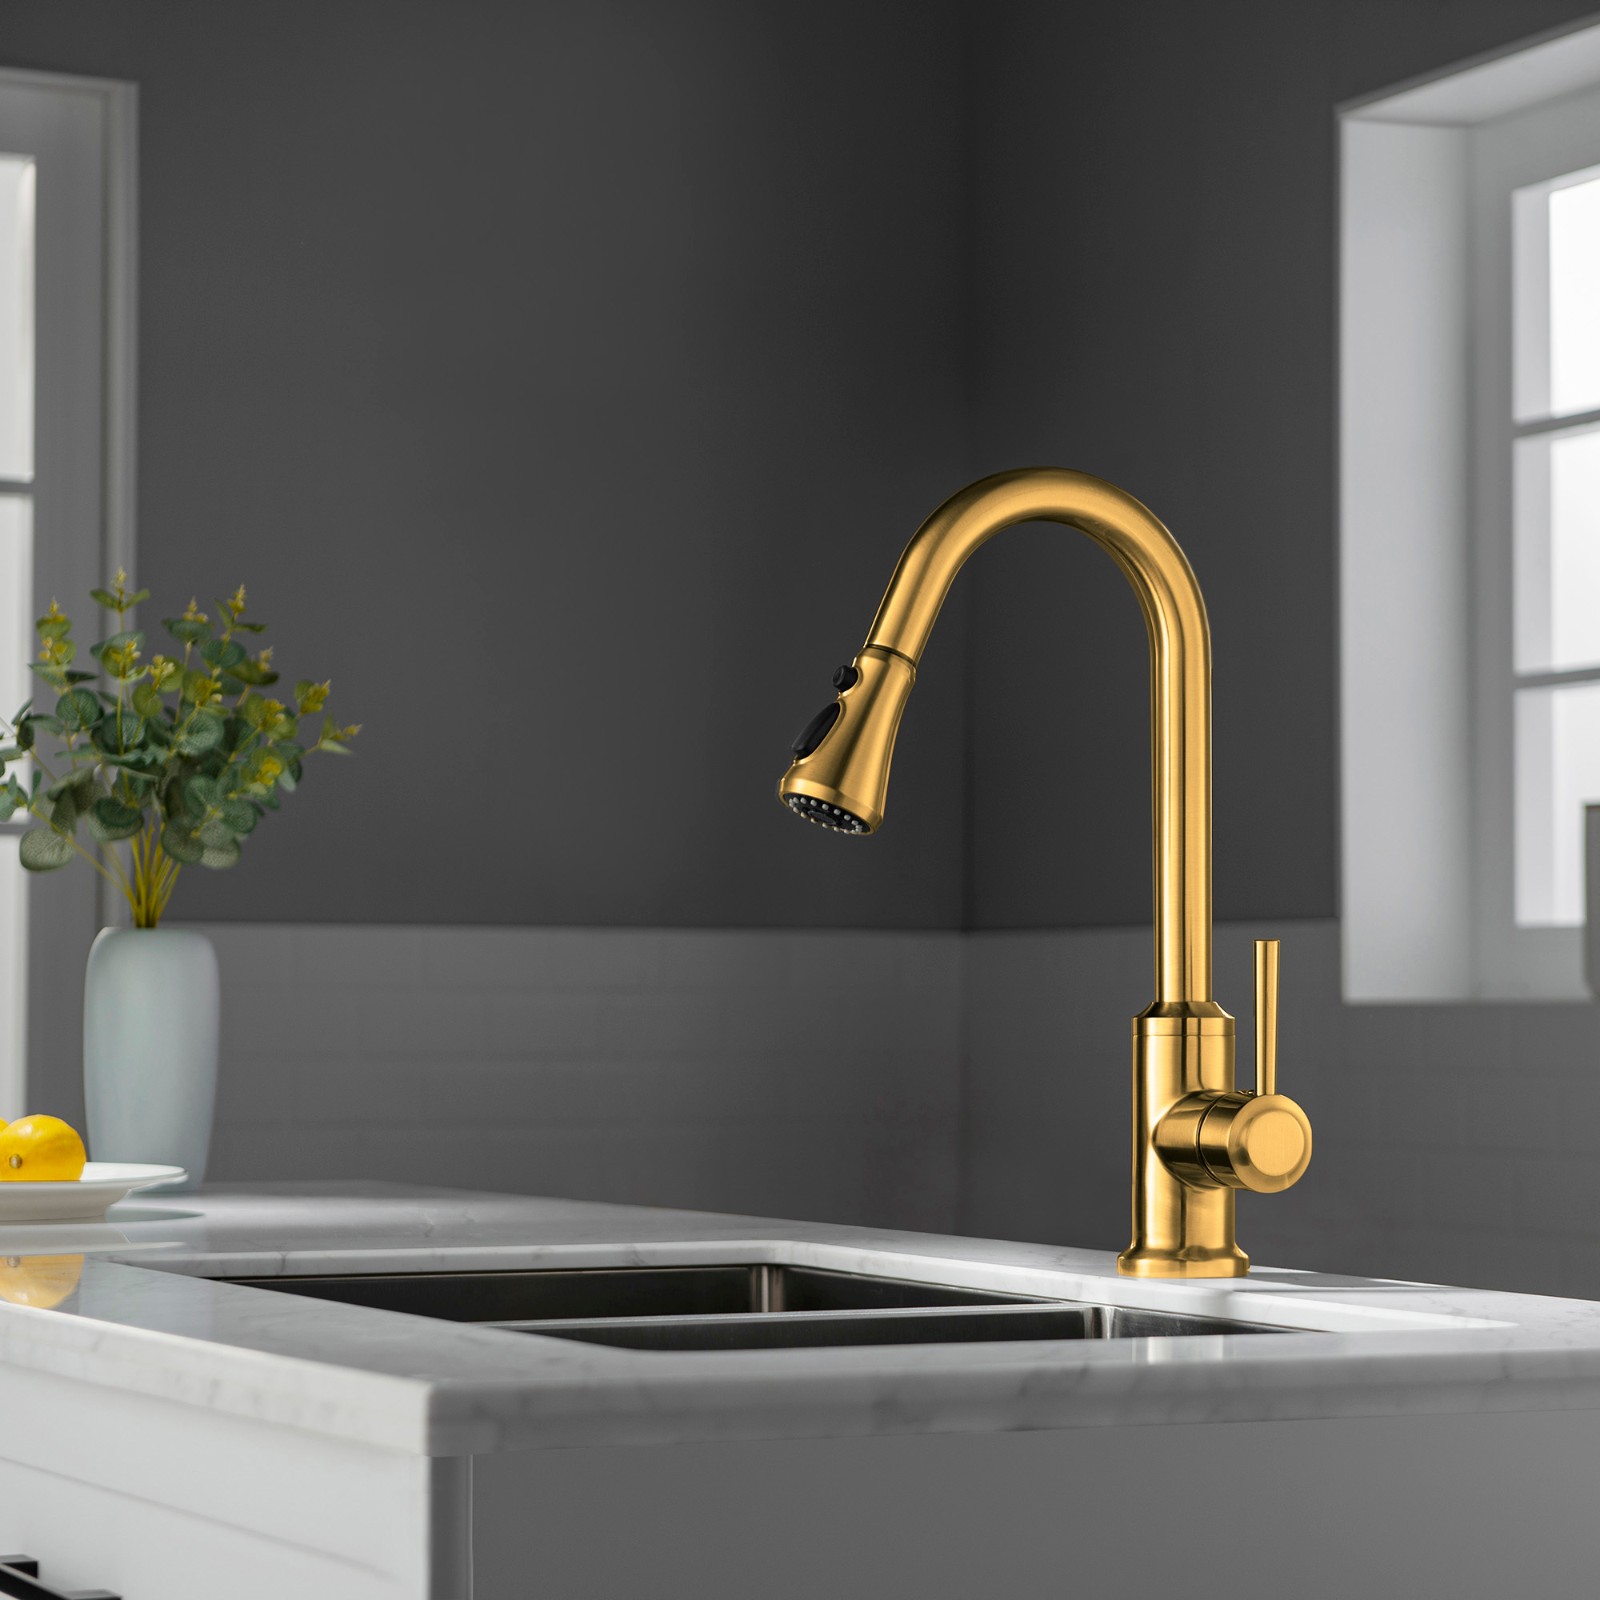  WOODBRIDGE WK101201BG Stainless Steel Single Handle Pull Down Kitchen Faucet in Brushed Gold Finish._4995